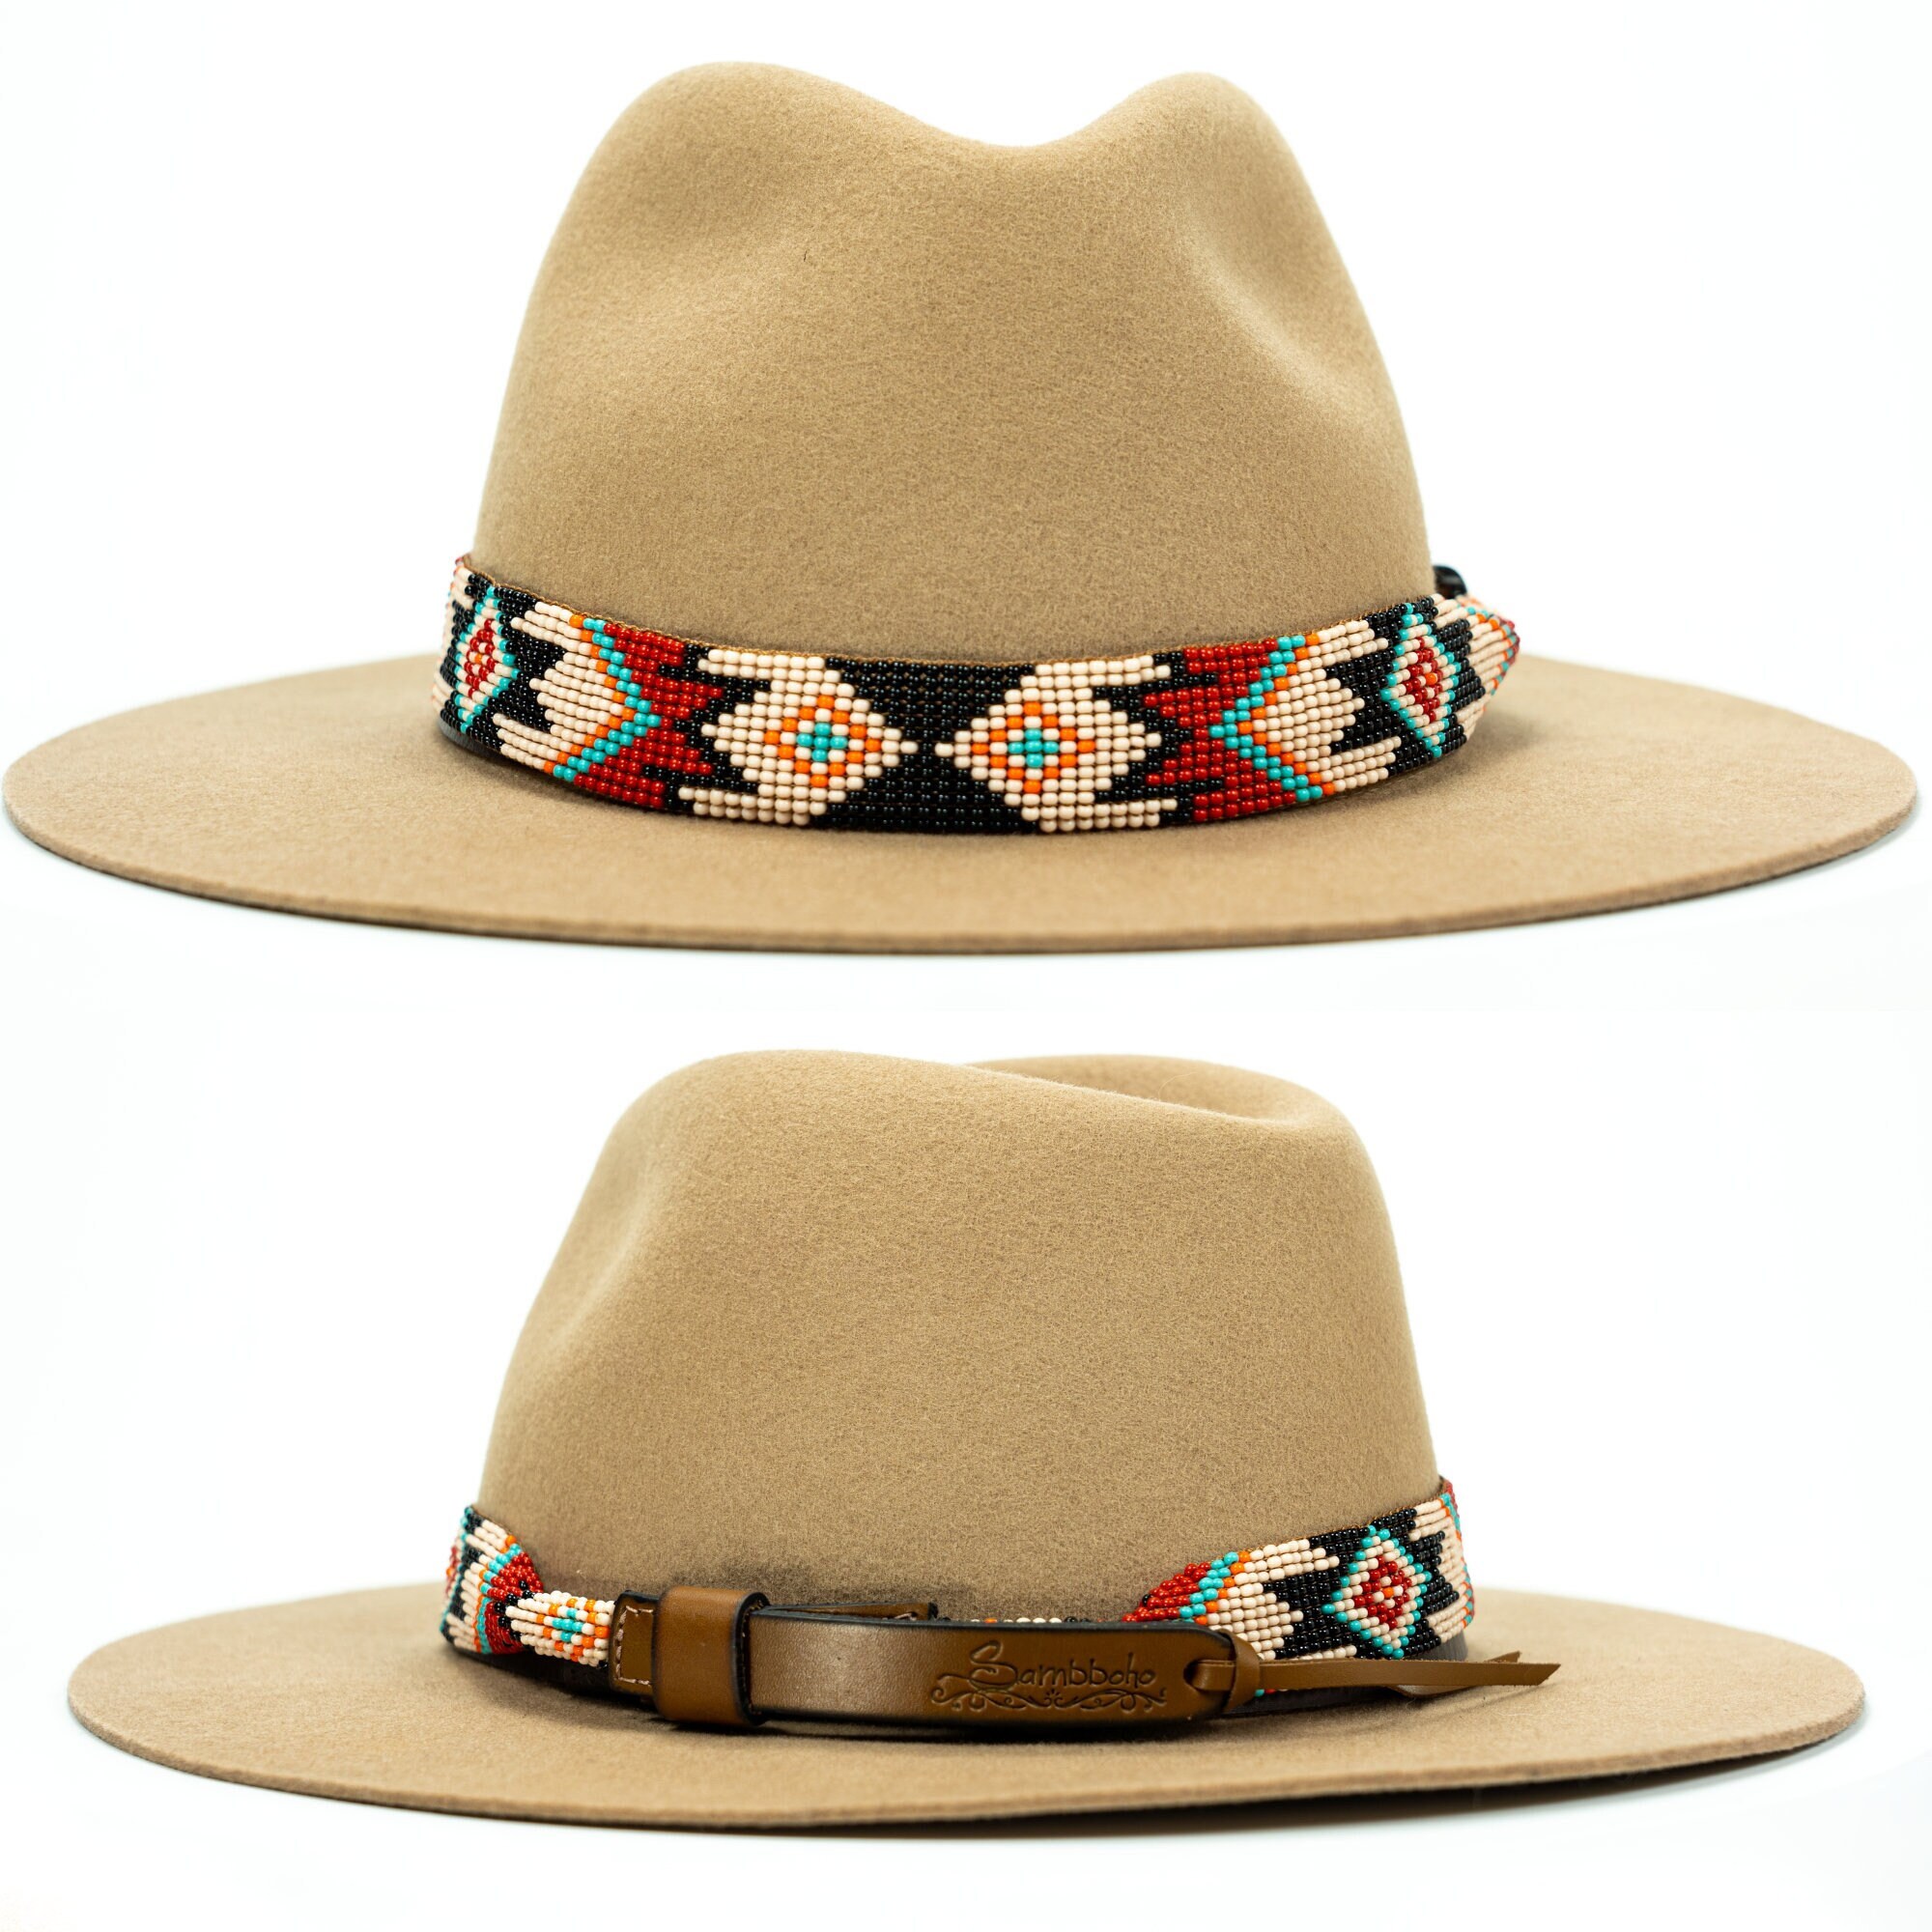 Beaded Leather Hatband 7/8 inch #hb113